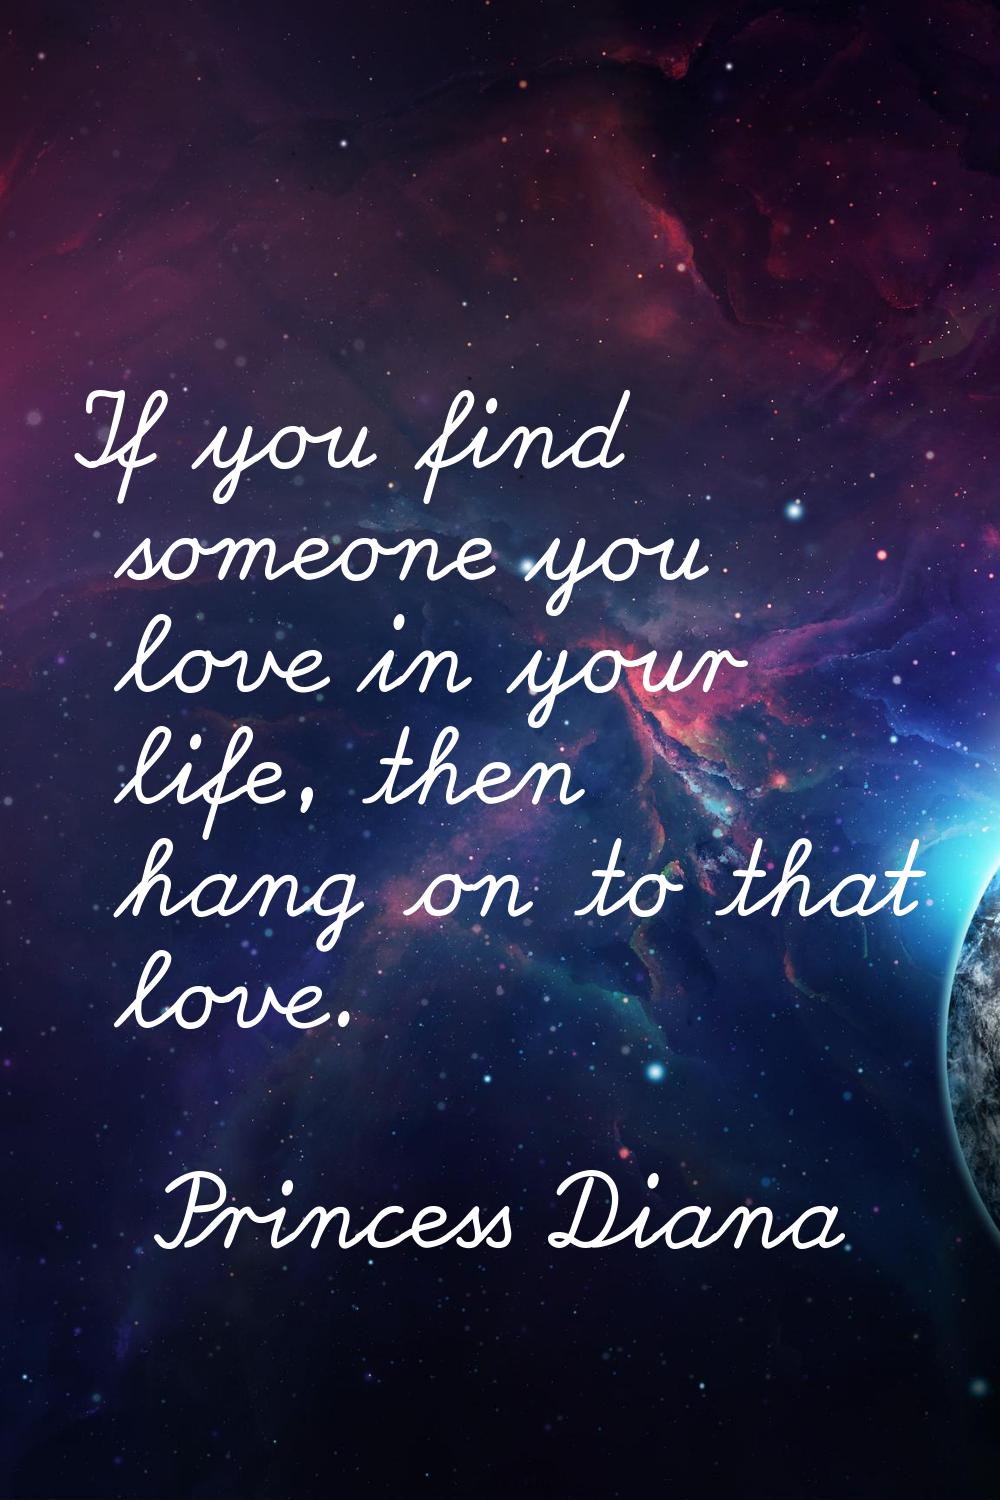 If you find someone you love in your life, then hang on to that love.